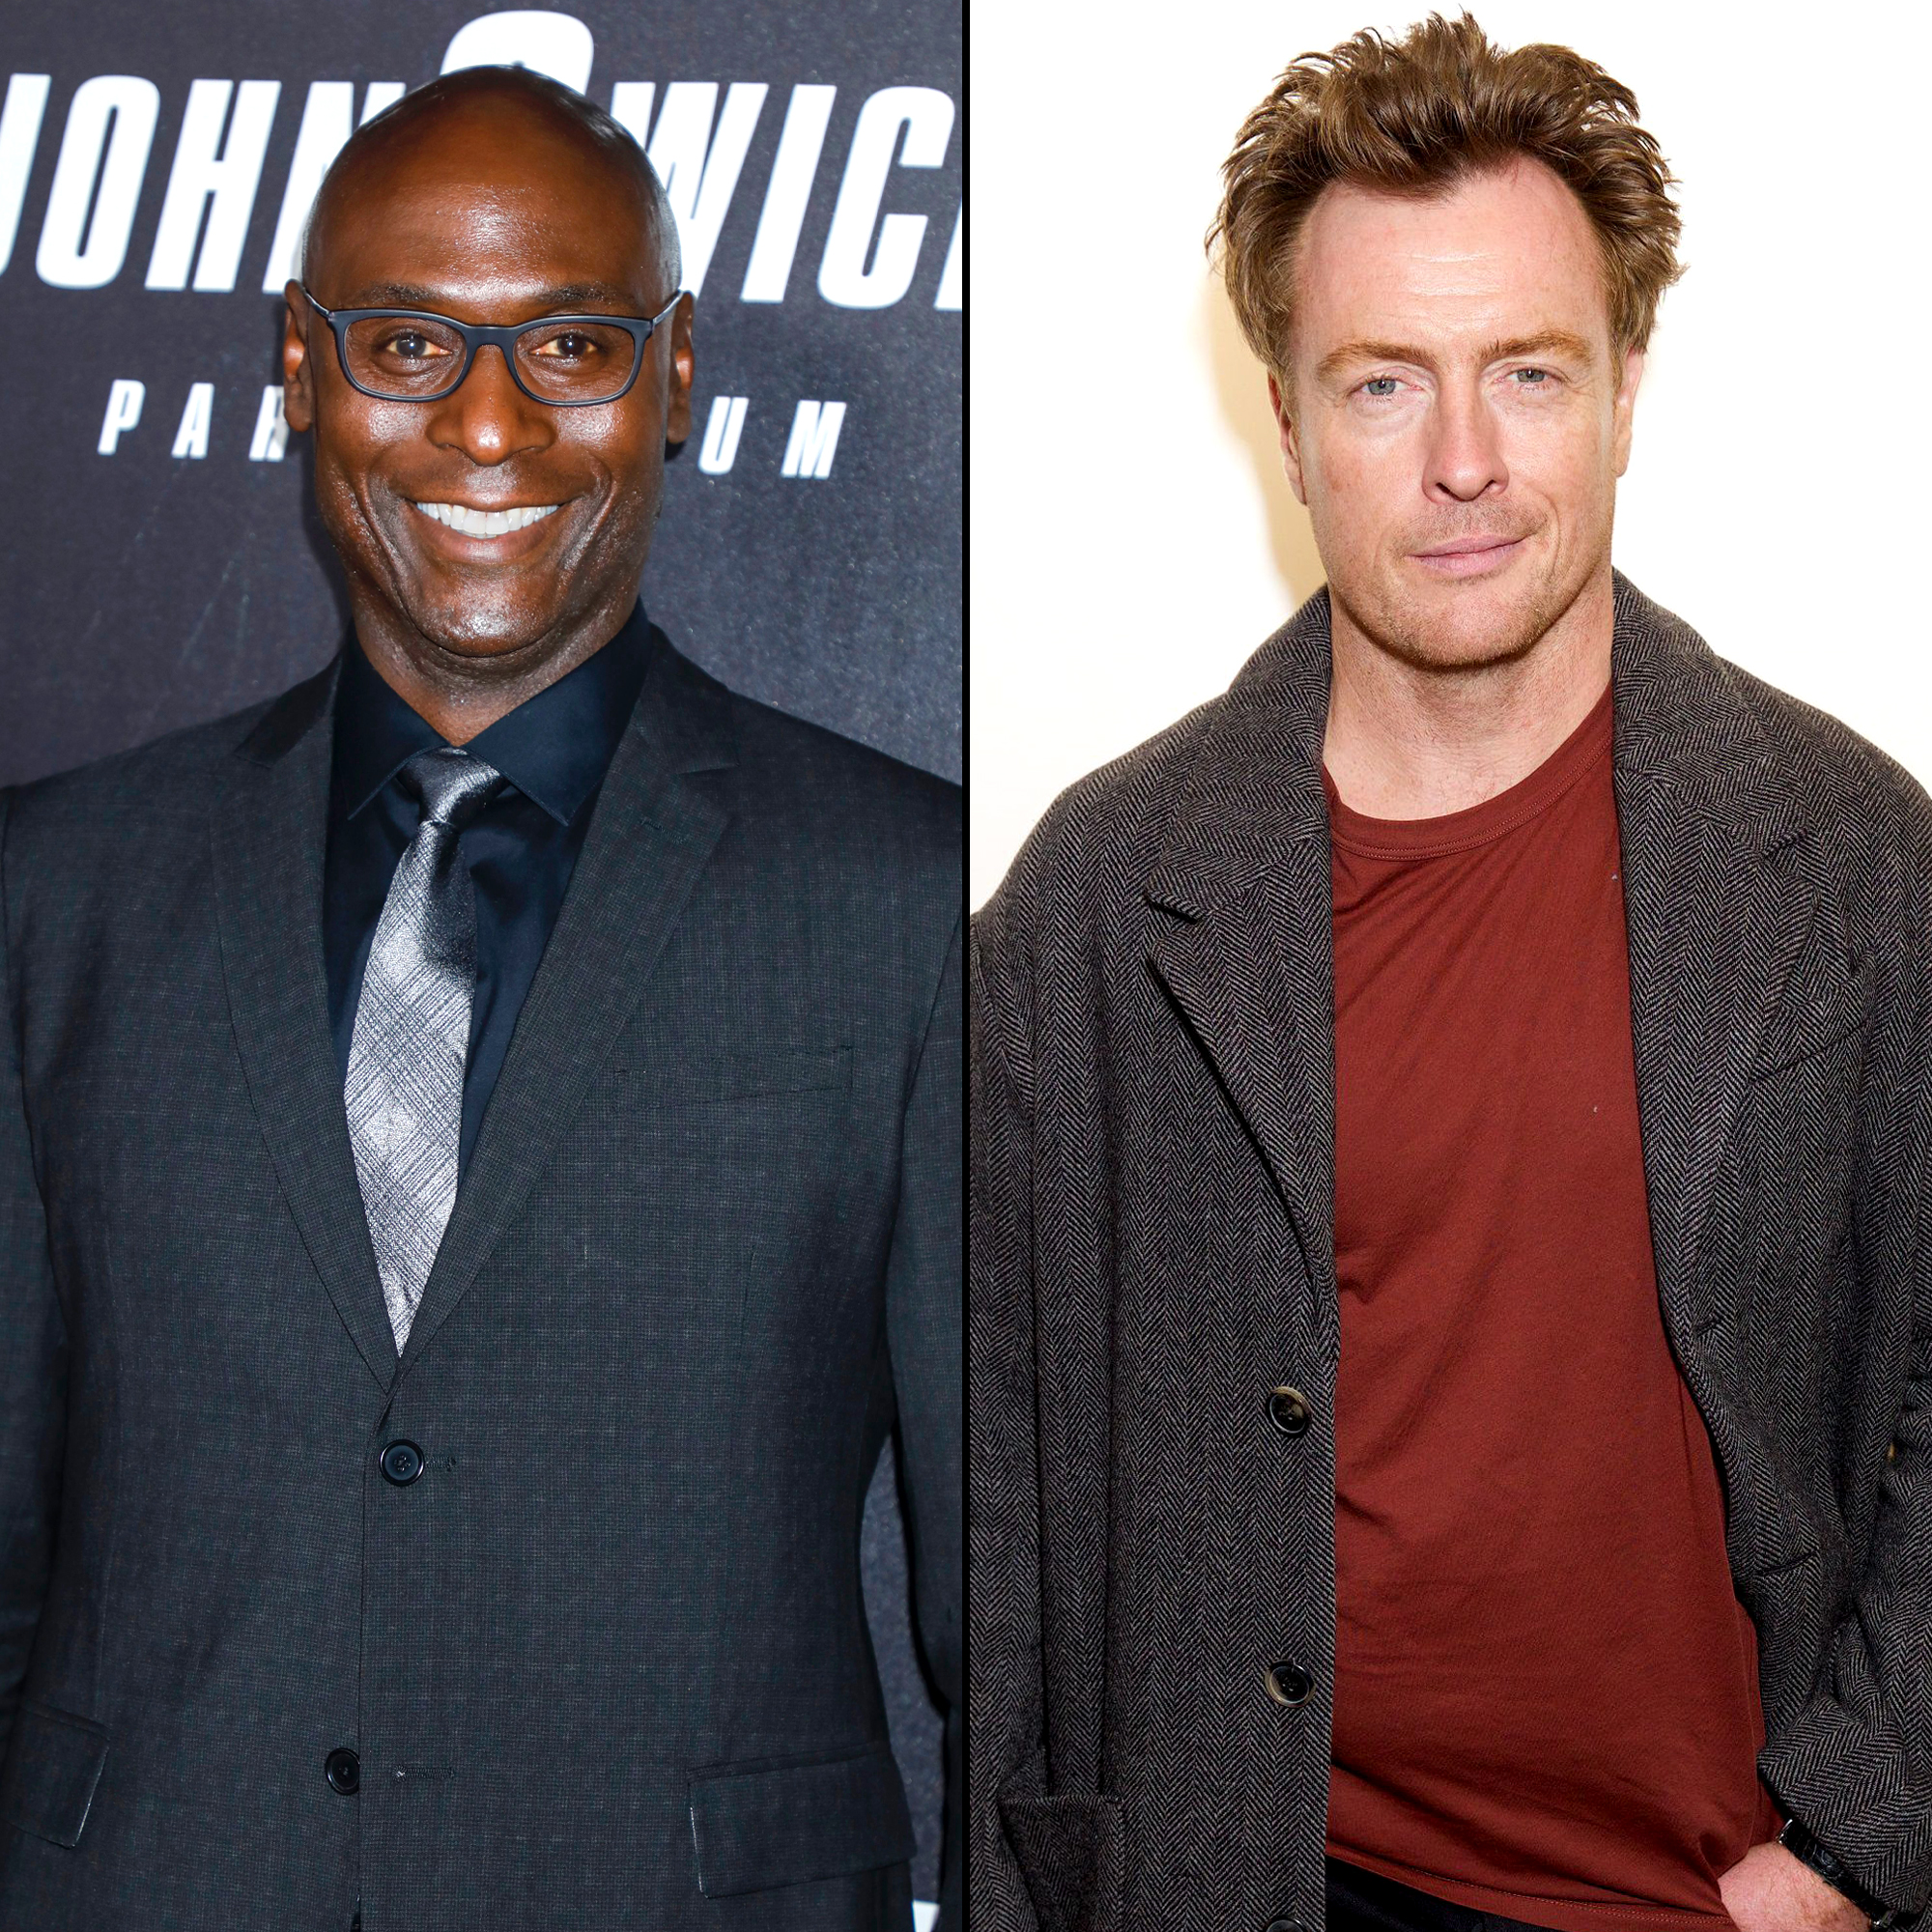 Percy Jackson Series Cast Adds Lance Reddick And Toby Stephens